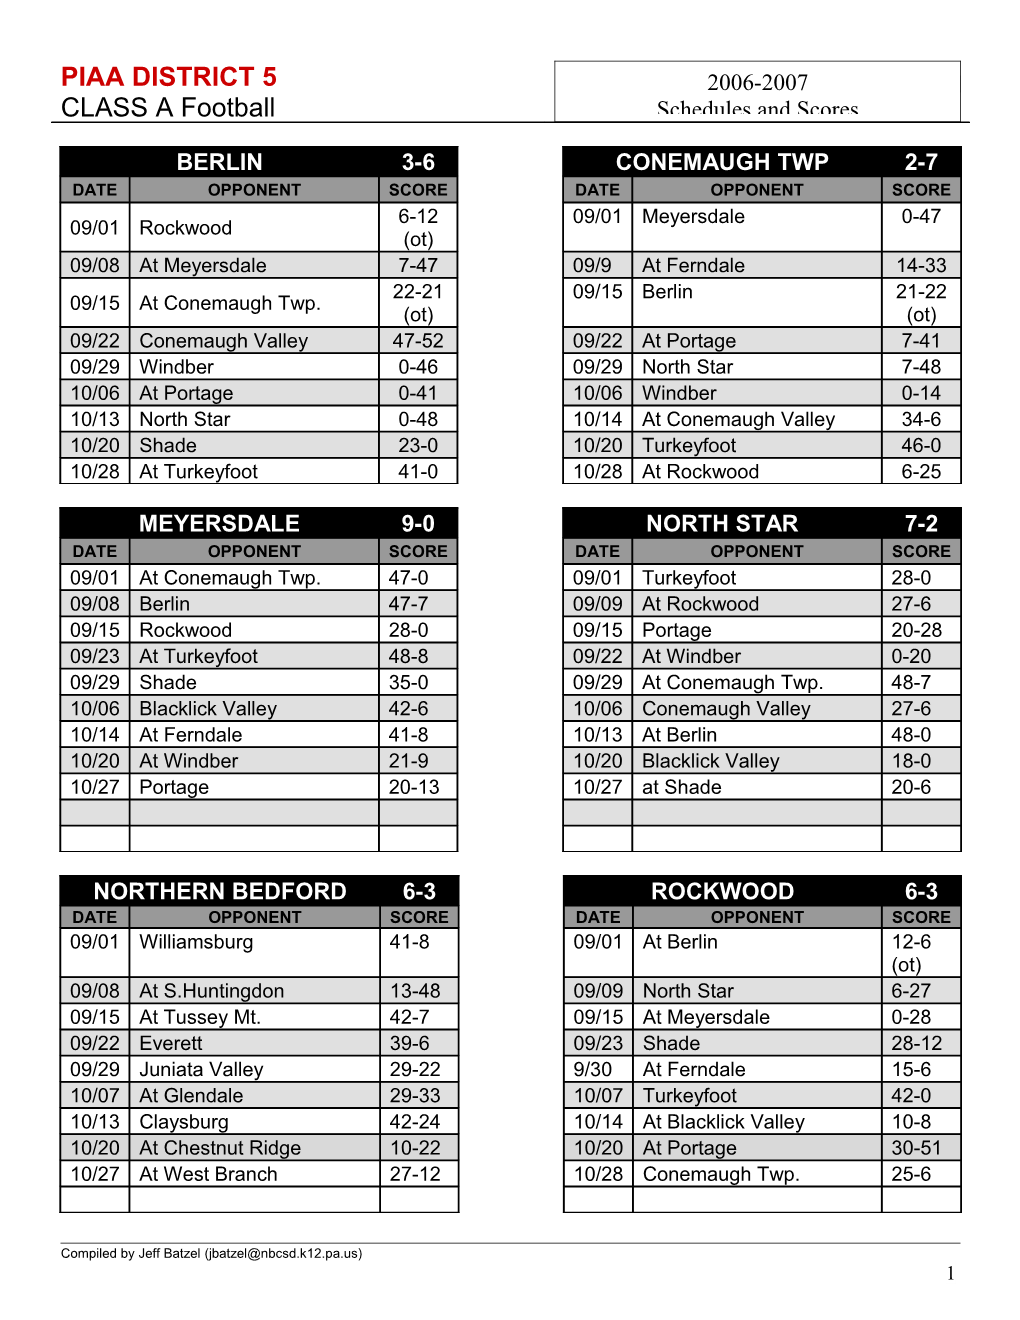 ICC 2004 Football Schedules s1